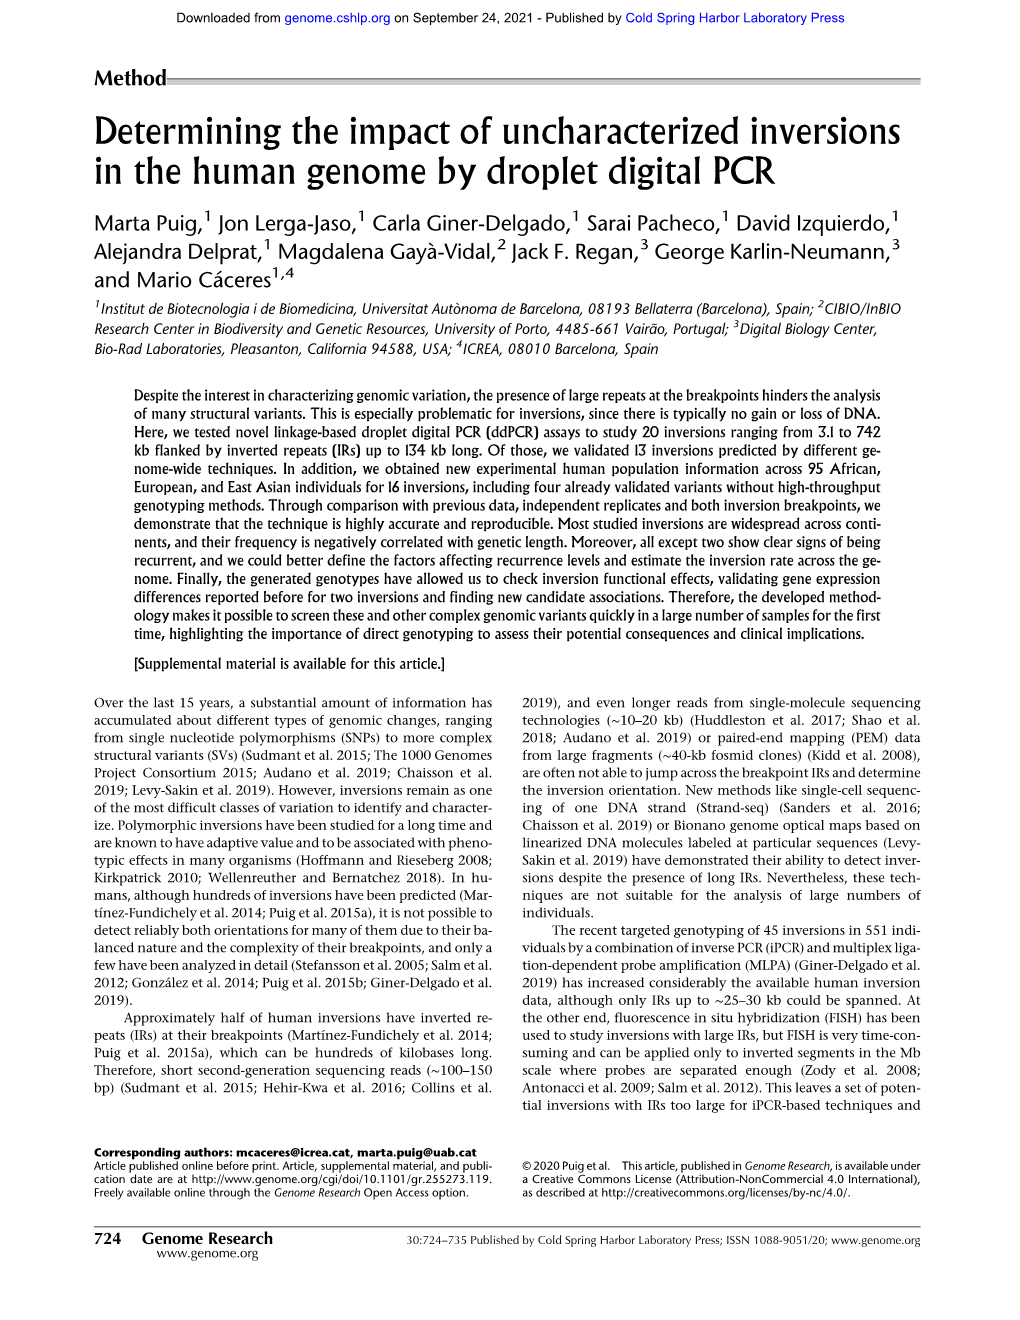 Determining the Impact of Uncharacterized Inversions in the Human Genome by Droplet Digital PCR